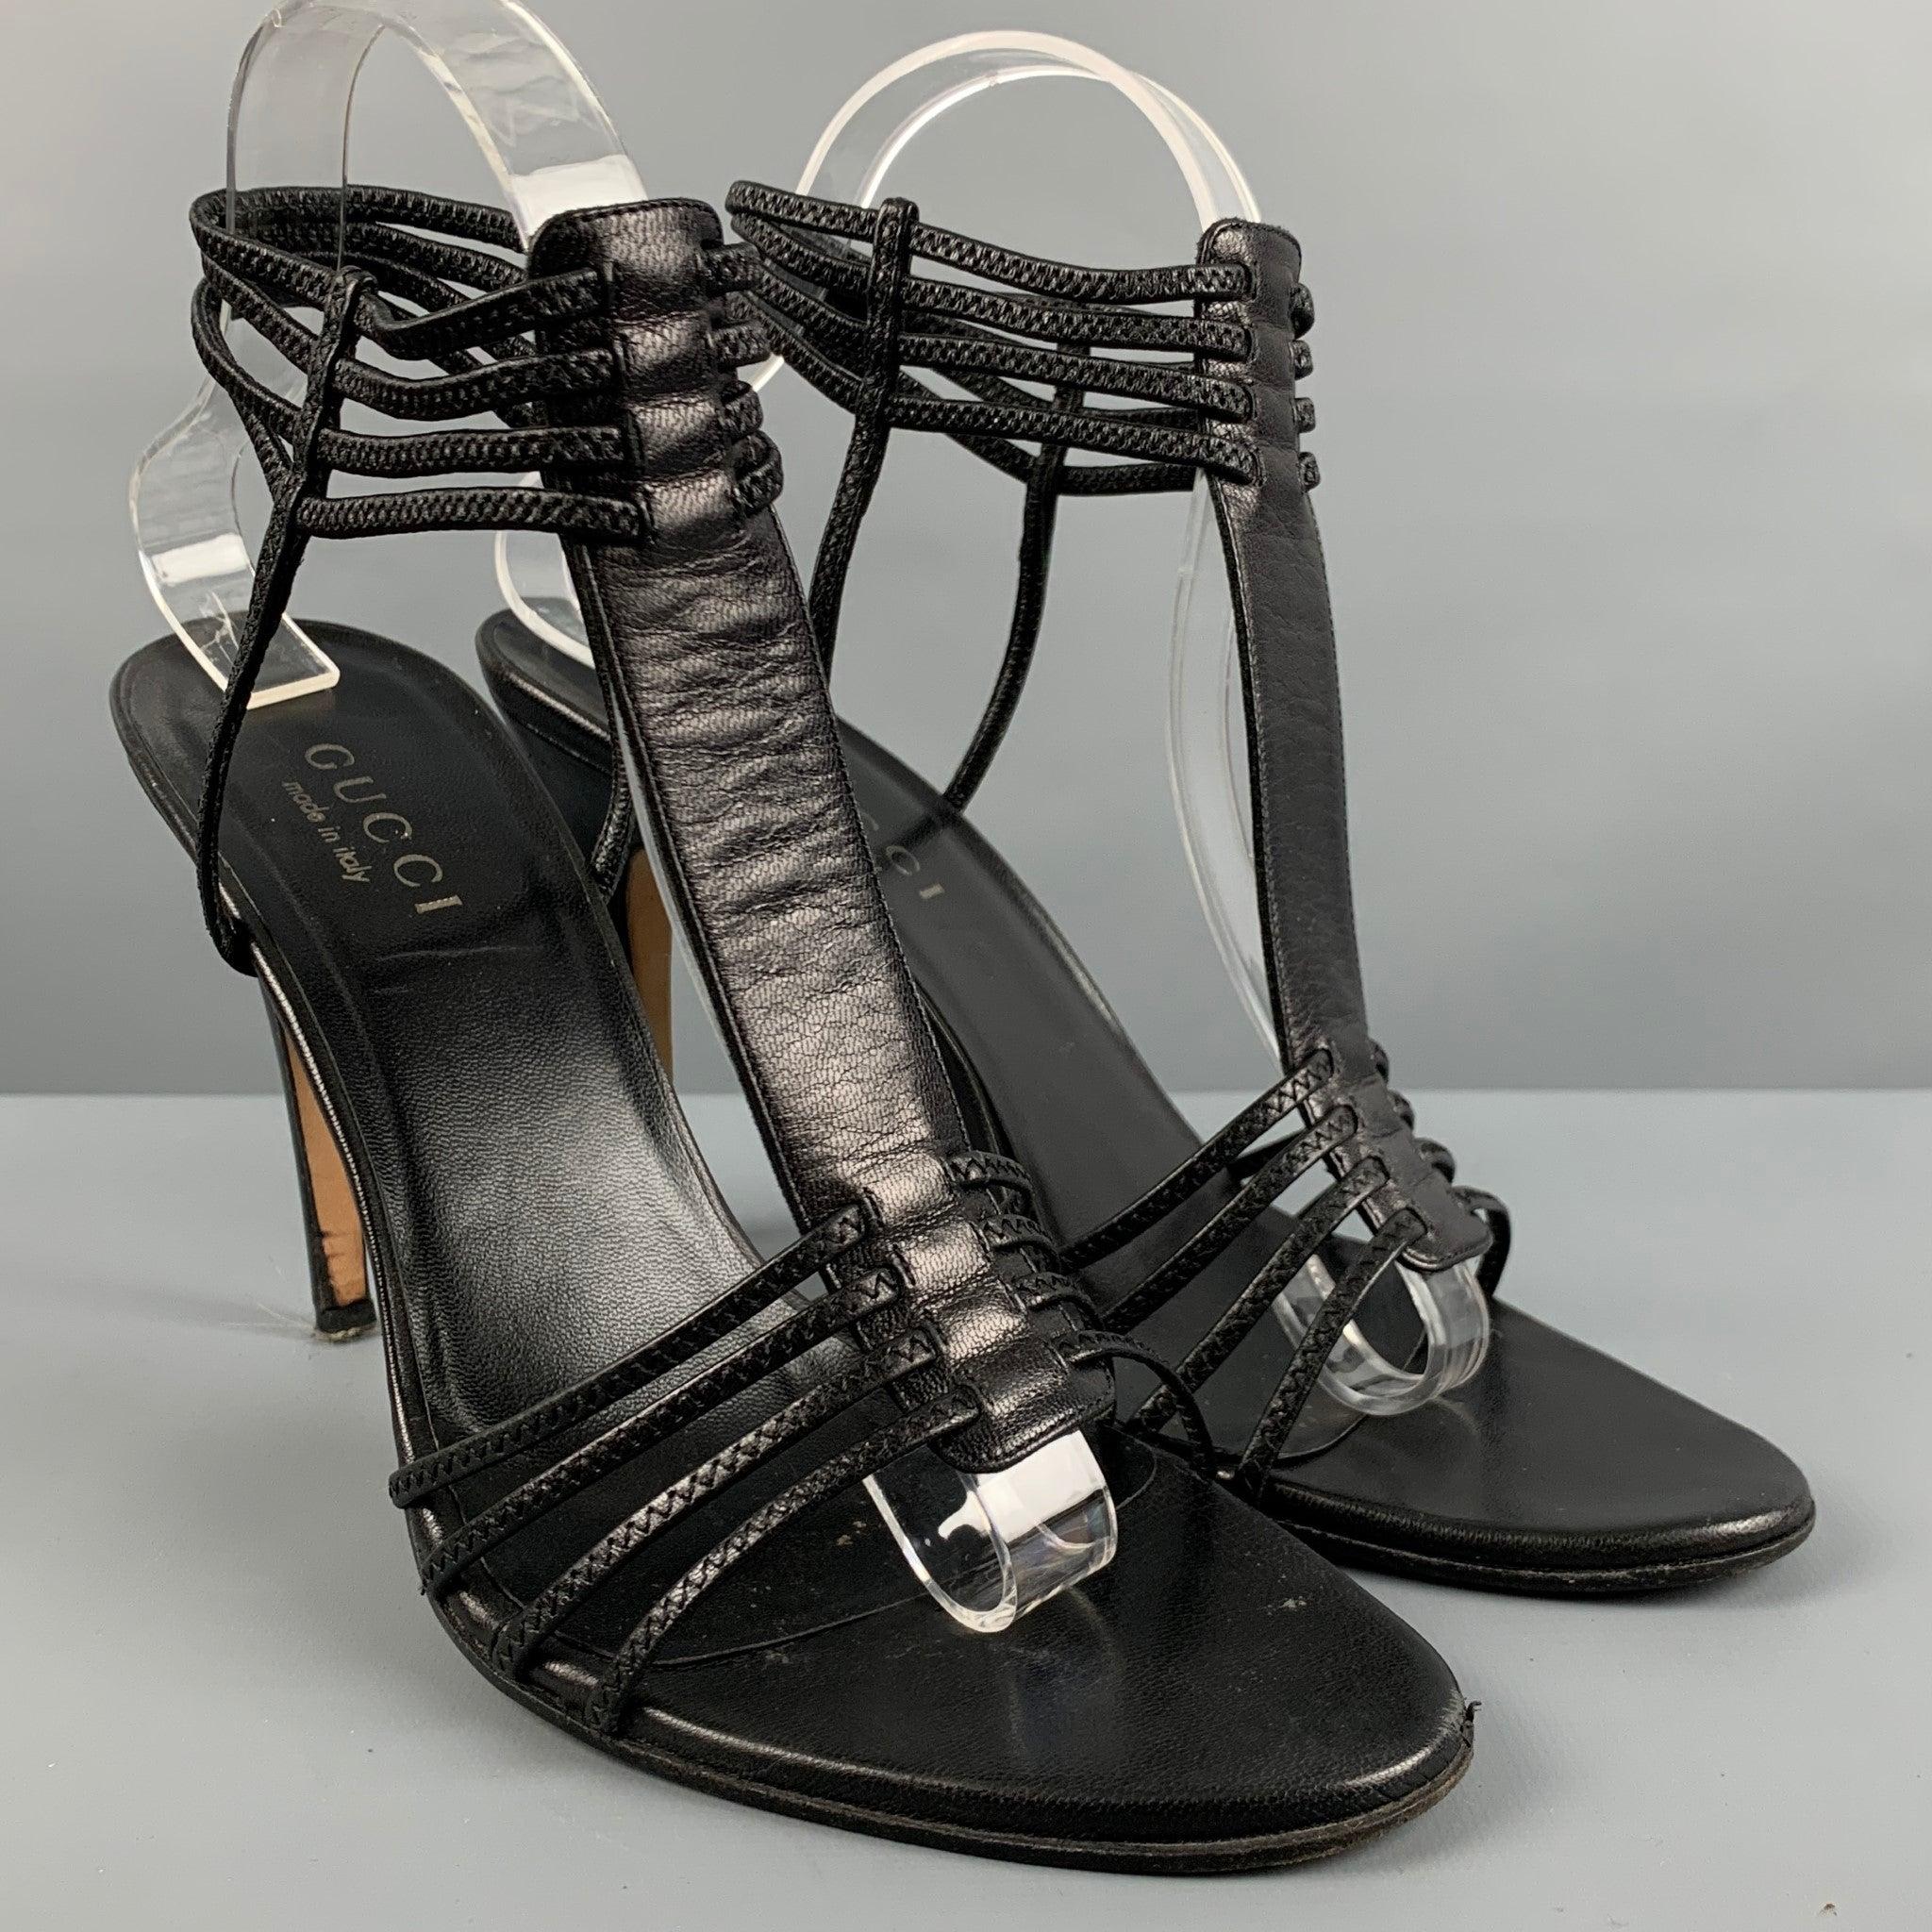 GUCCI sandals comes in a black leather featuring a strappy style. Comes with the box, dust bag, and extra heel replacement tips. Made in Italy.Very Good Pre-Owned Condition. Minor signs of wear. 

Marked:   091043 9B 

Measurements: 
  Heel: 4.25